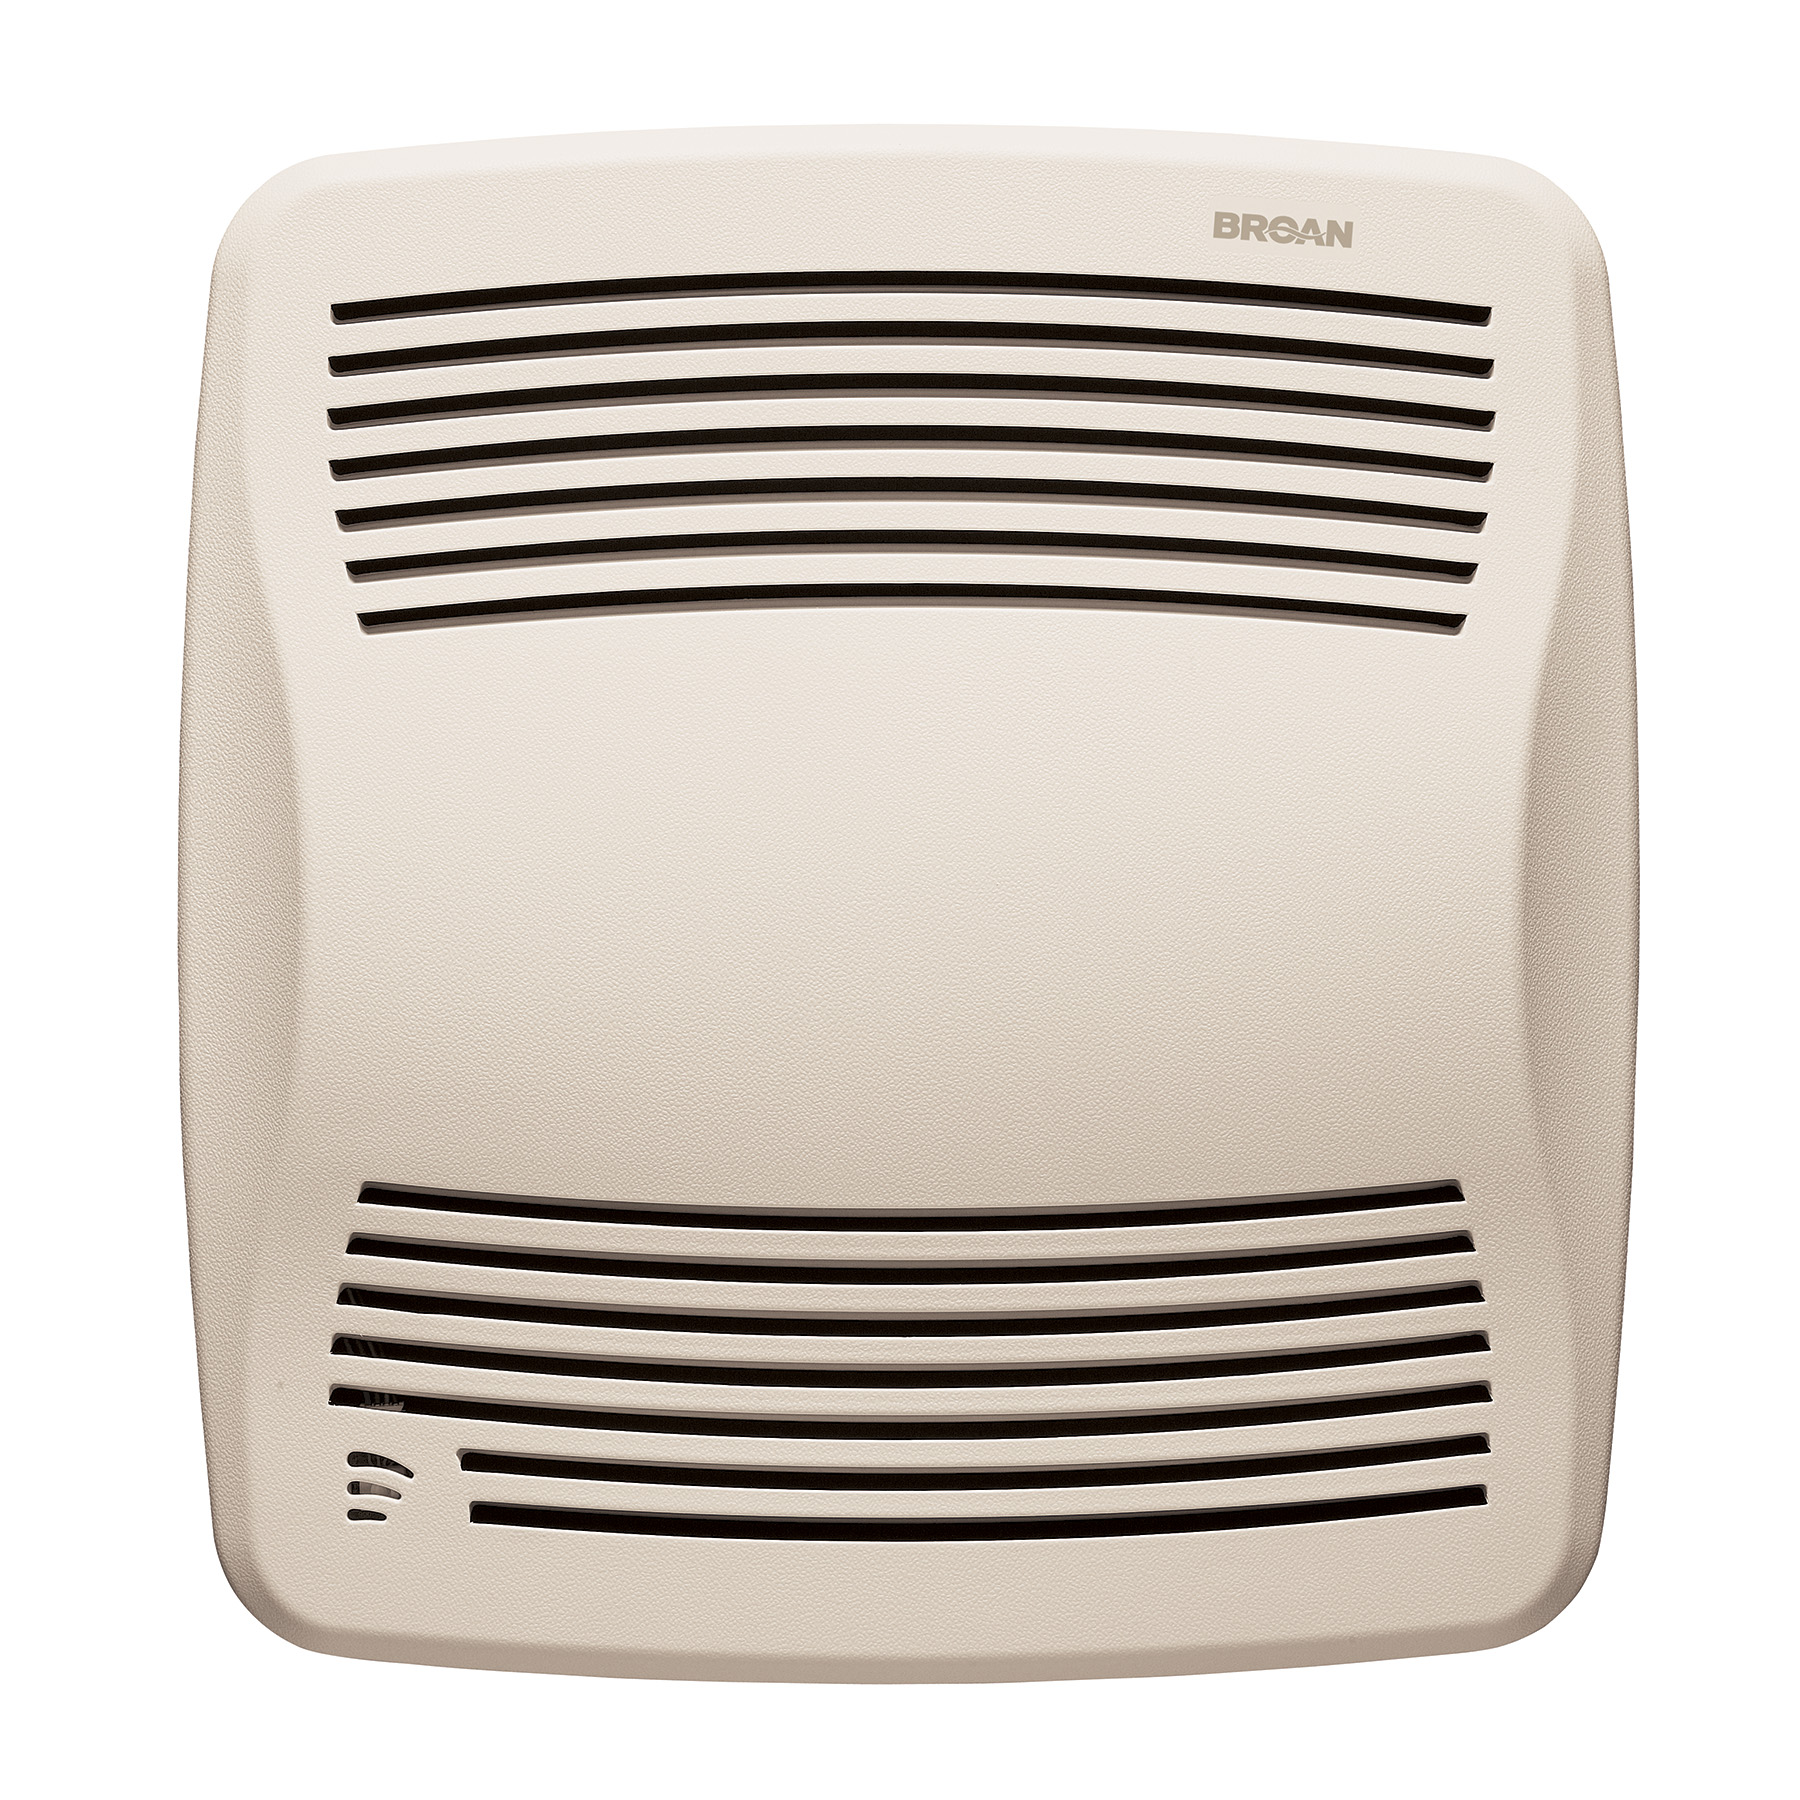 Broan® 110 CFM Humidity Sensing Exhaust Vent Fan w/ White Grille, ENERGY STAR® 